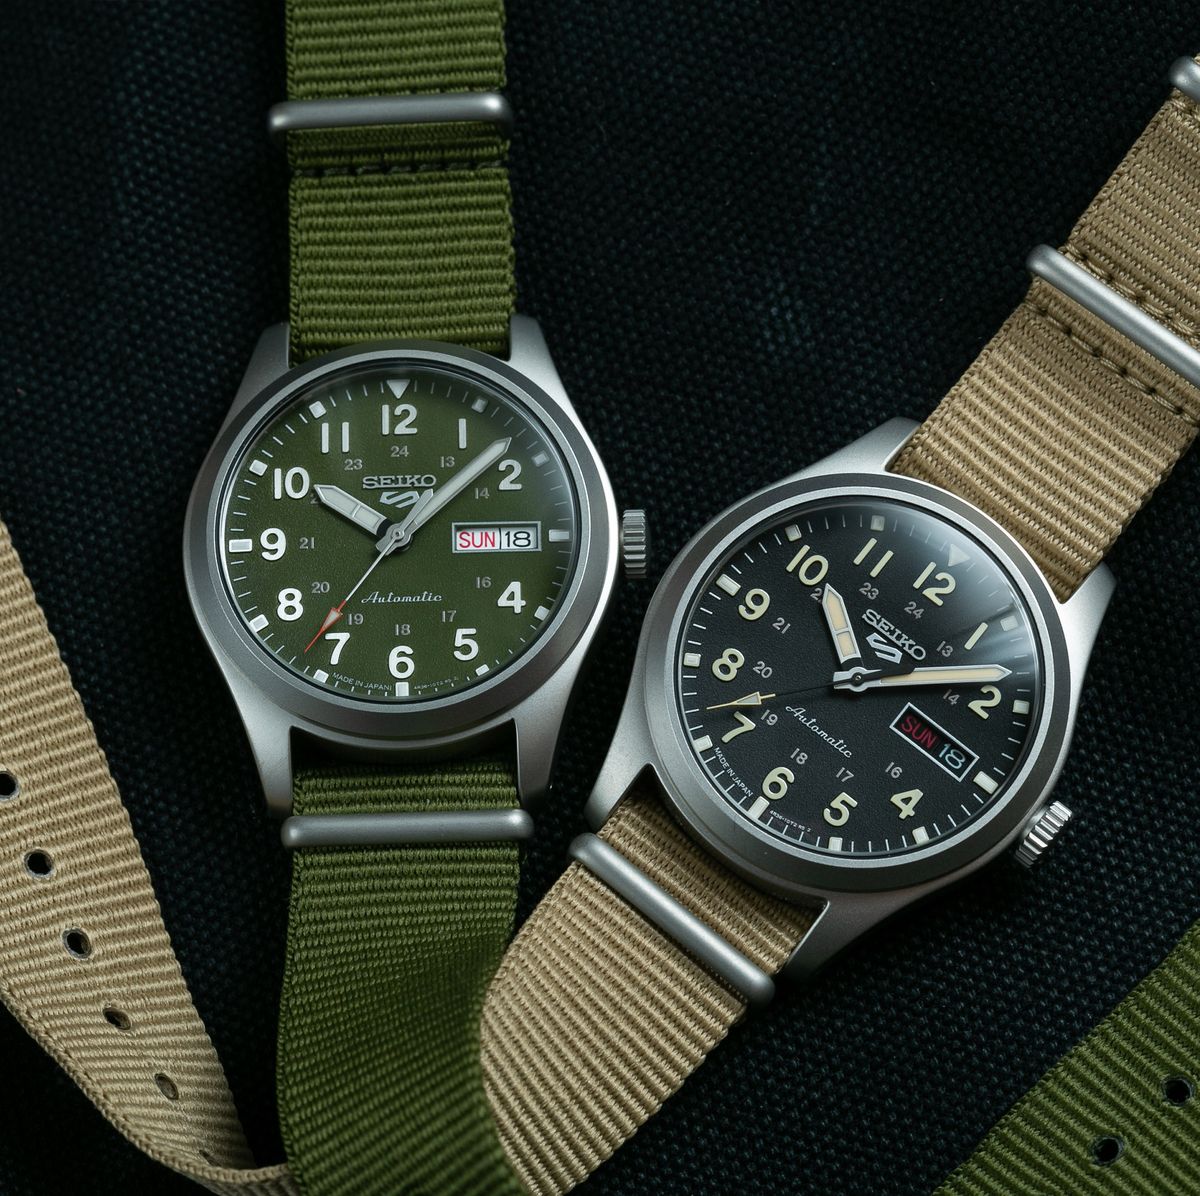 A Solid Automatic Field Watch for Under $300? Seiko's Done It Again